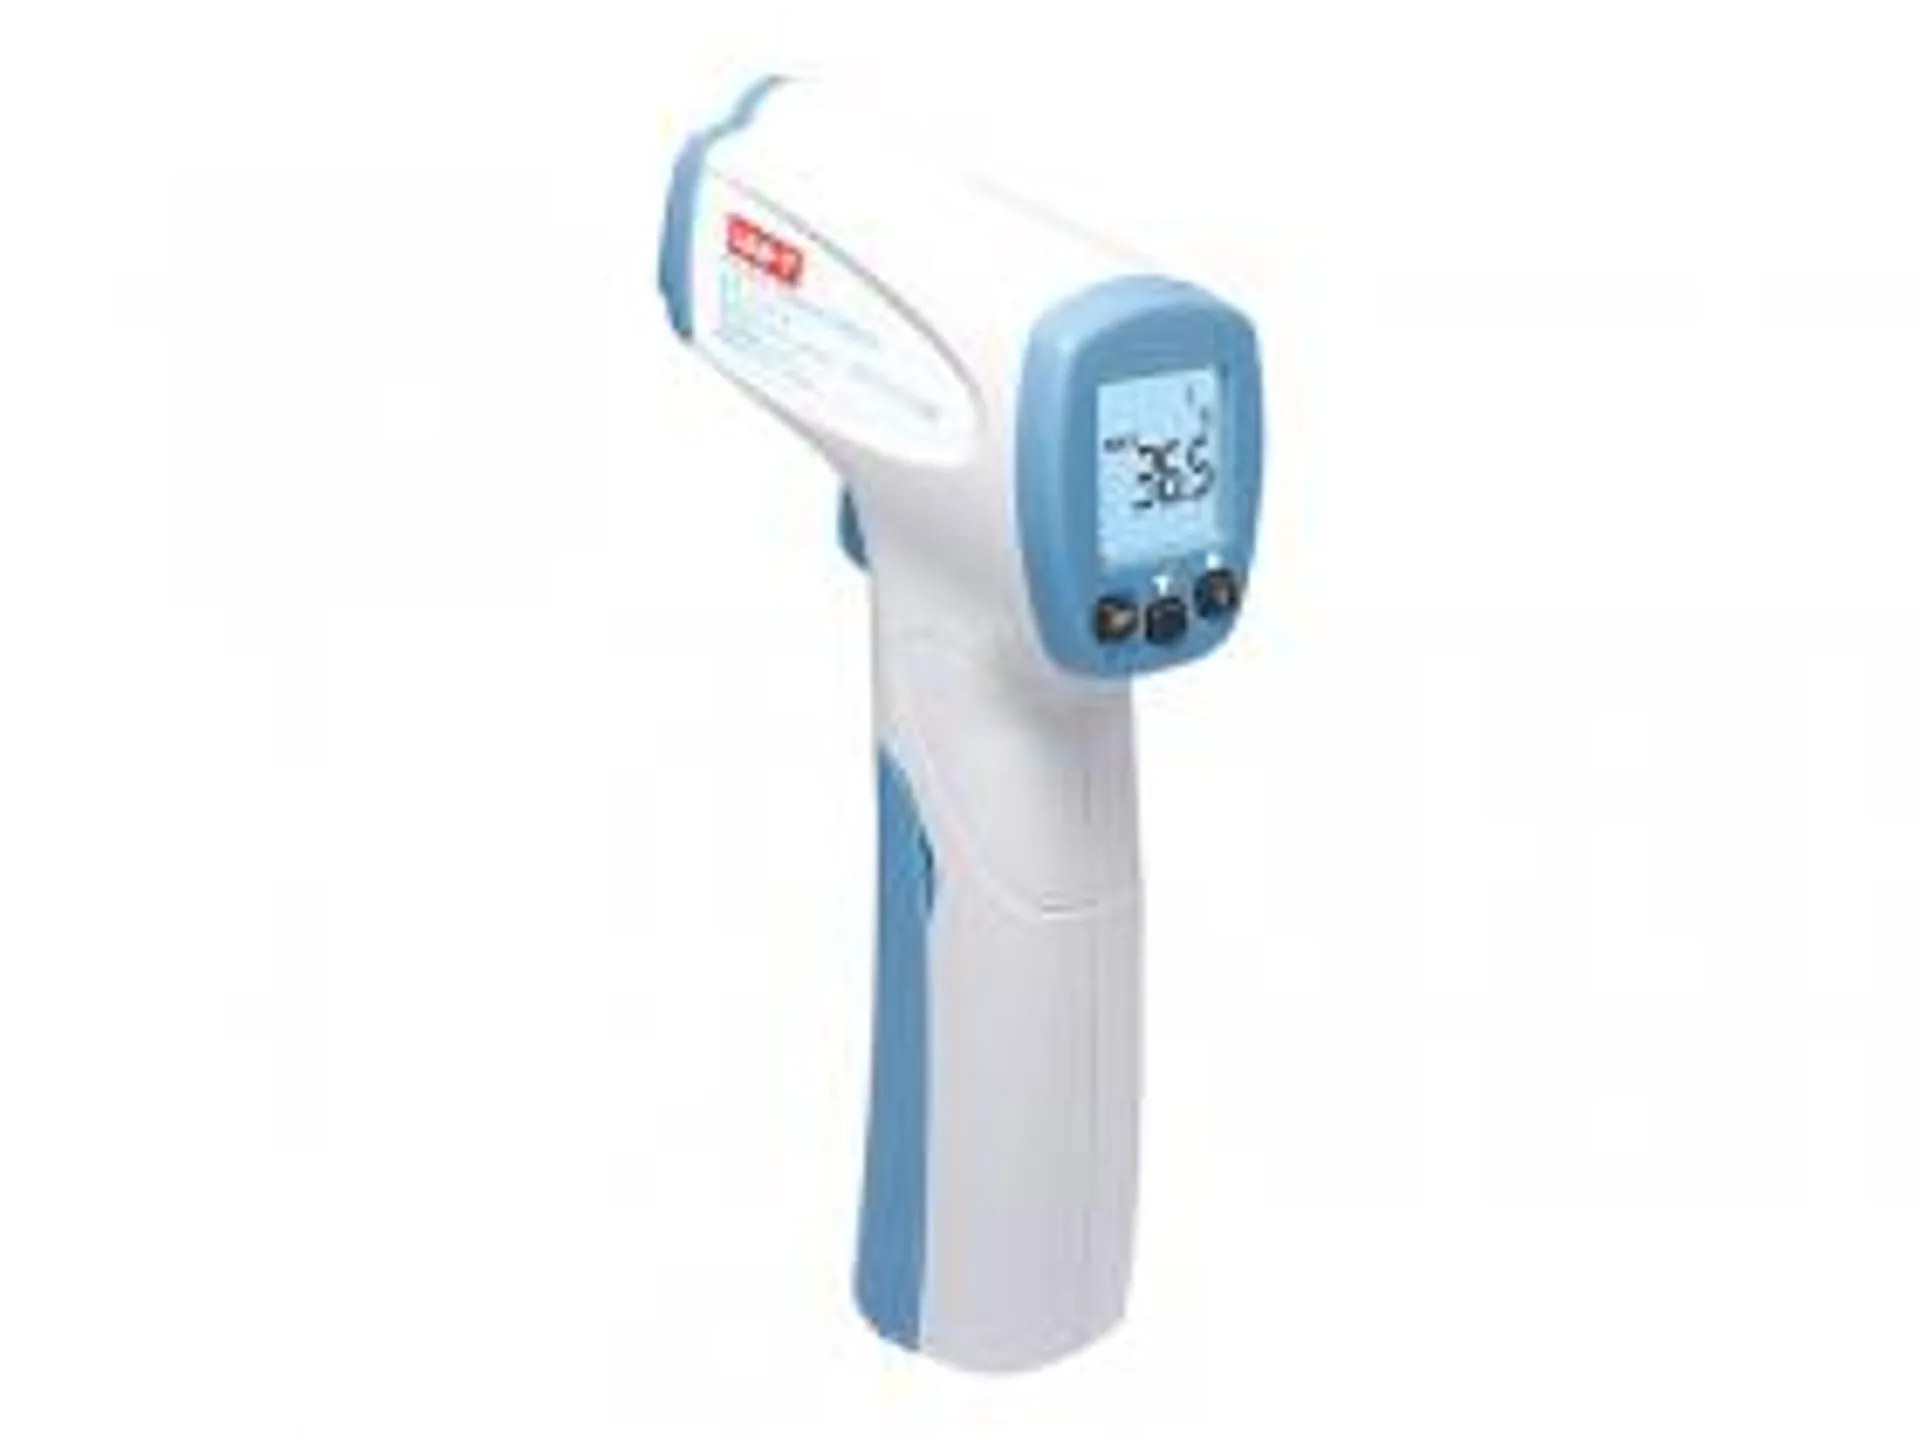 UT300H LCD Infrared Digital Thermometer...